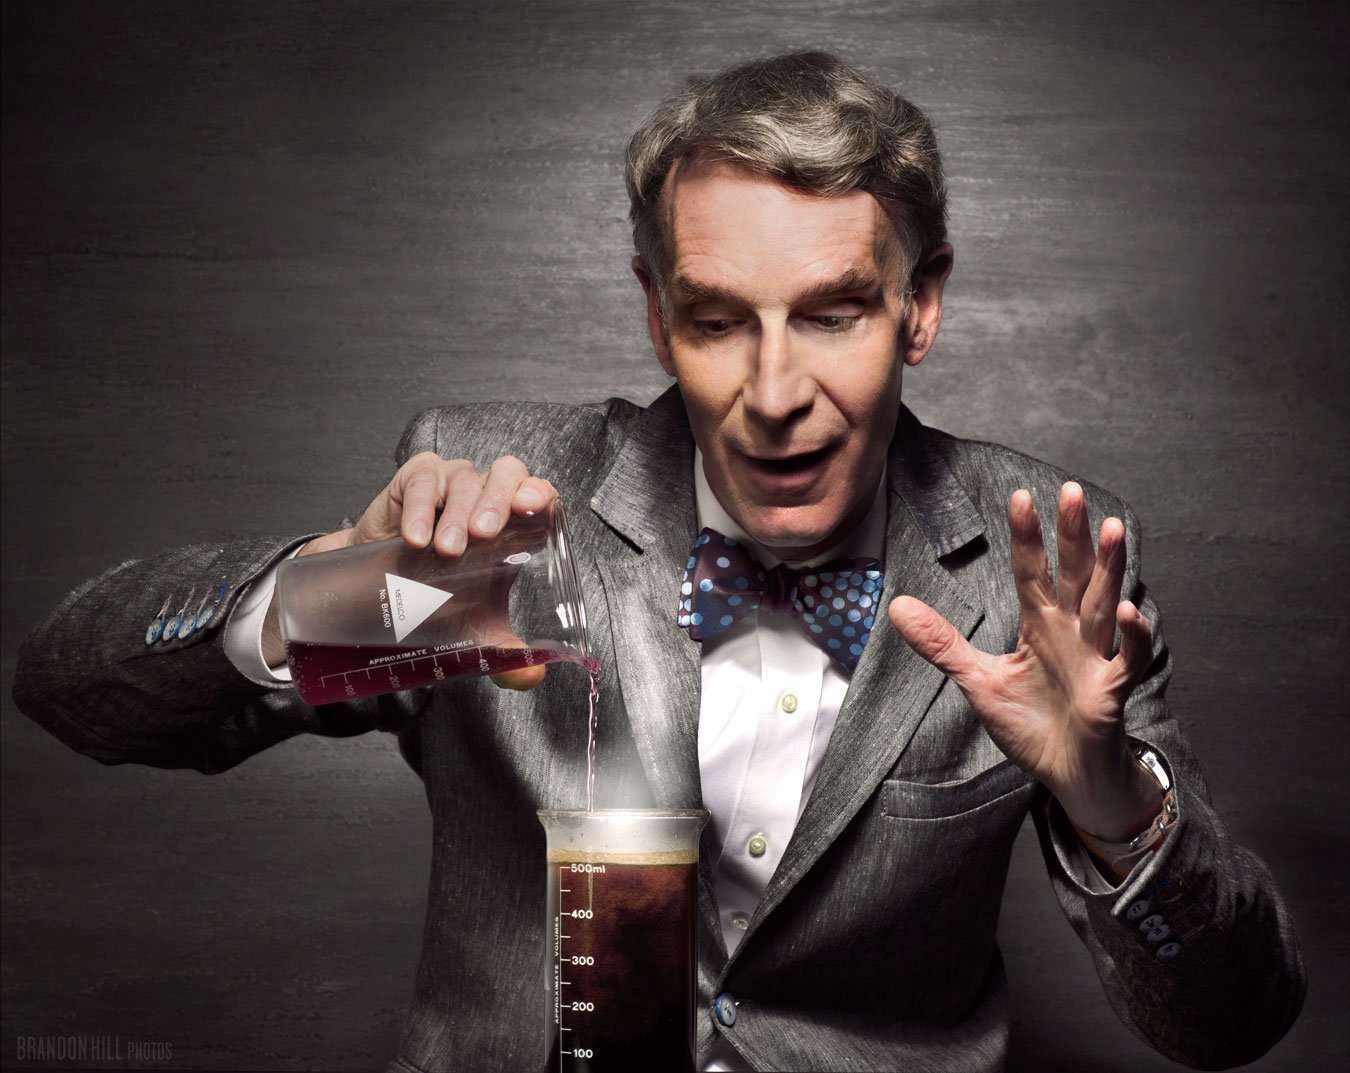 -
Today in Geek History: Happy Birthday Bill Nye! The Science Guy turns 60 today. BILL ...  